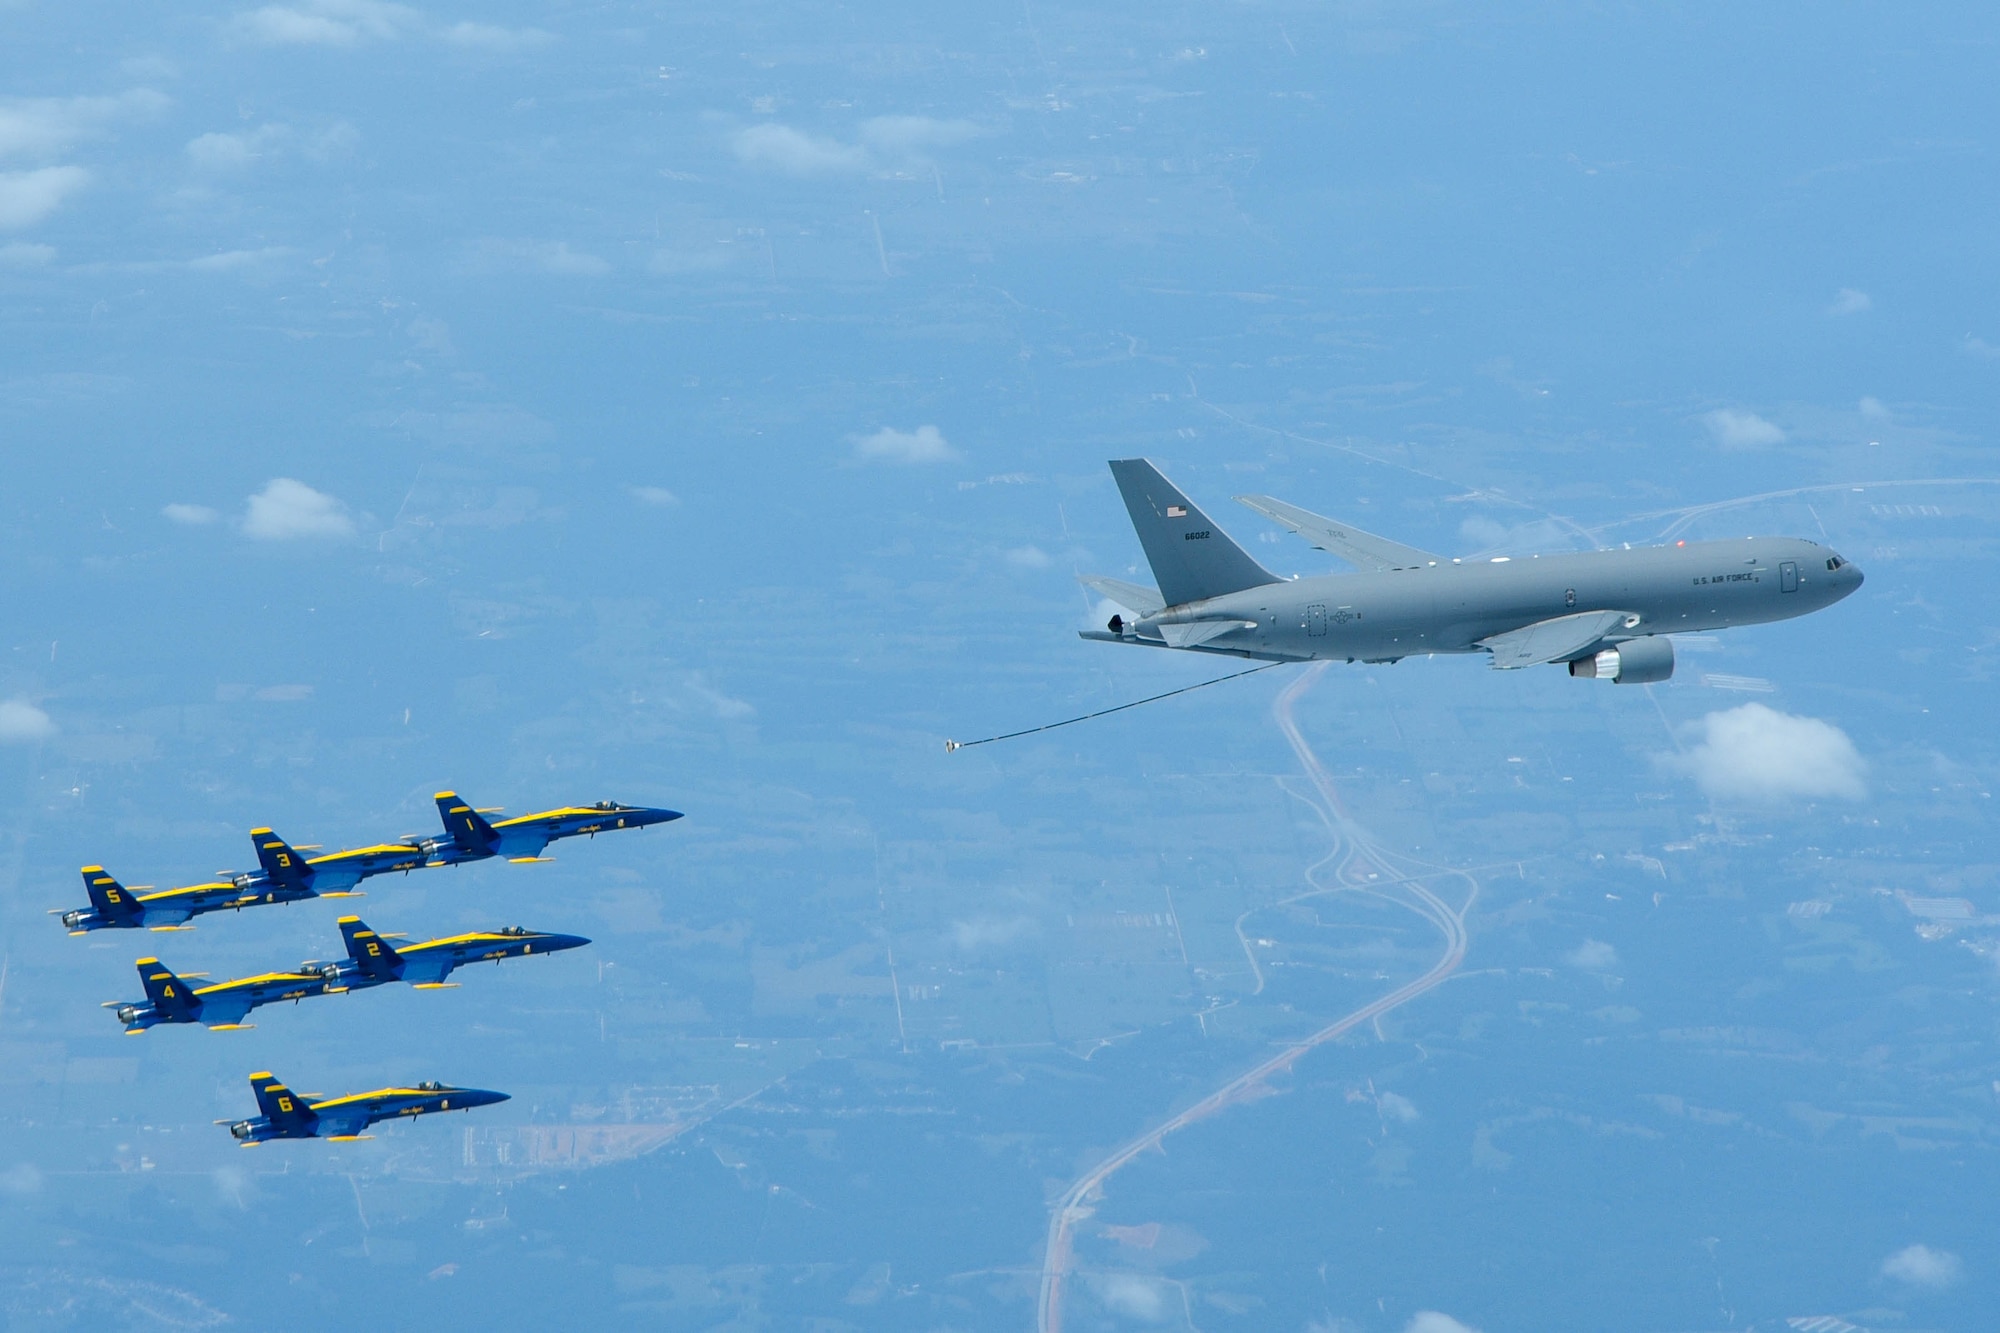 A KC-46 Pegasus assigned to the 931st Air Refueling Wing, McConnell Air Force Base, Kan., lines up to refuel an U.S. Navy Blue Angels F/A-18 Hornet, July 1, 2020 over South Dakota. This marks the first time the 931st ARW refueled the Blue Angels using a KC-46.